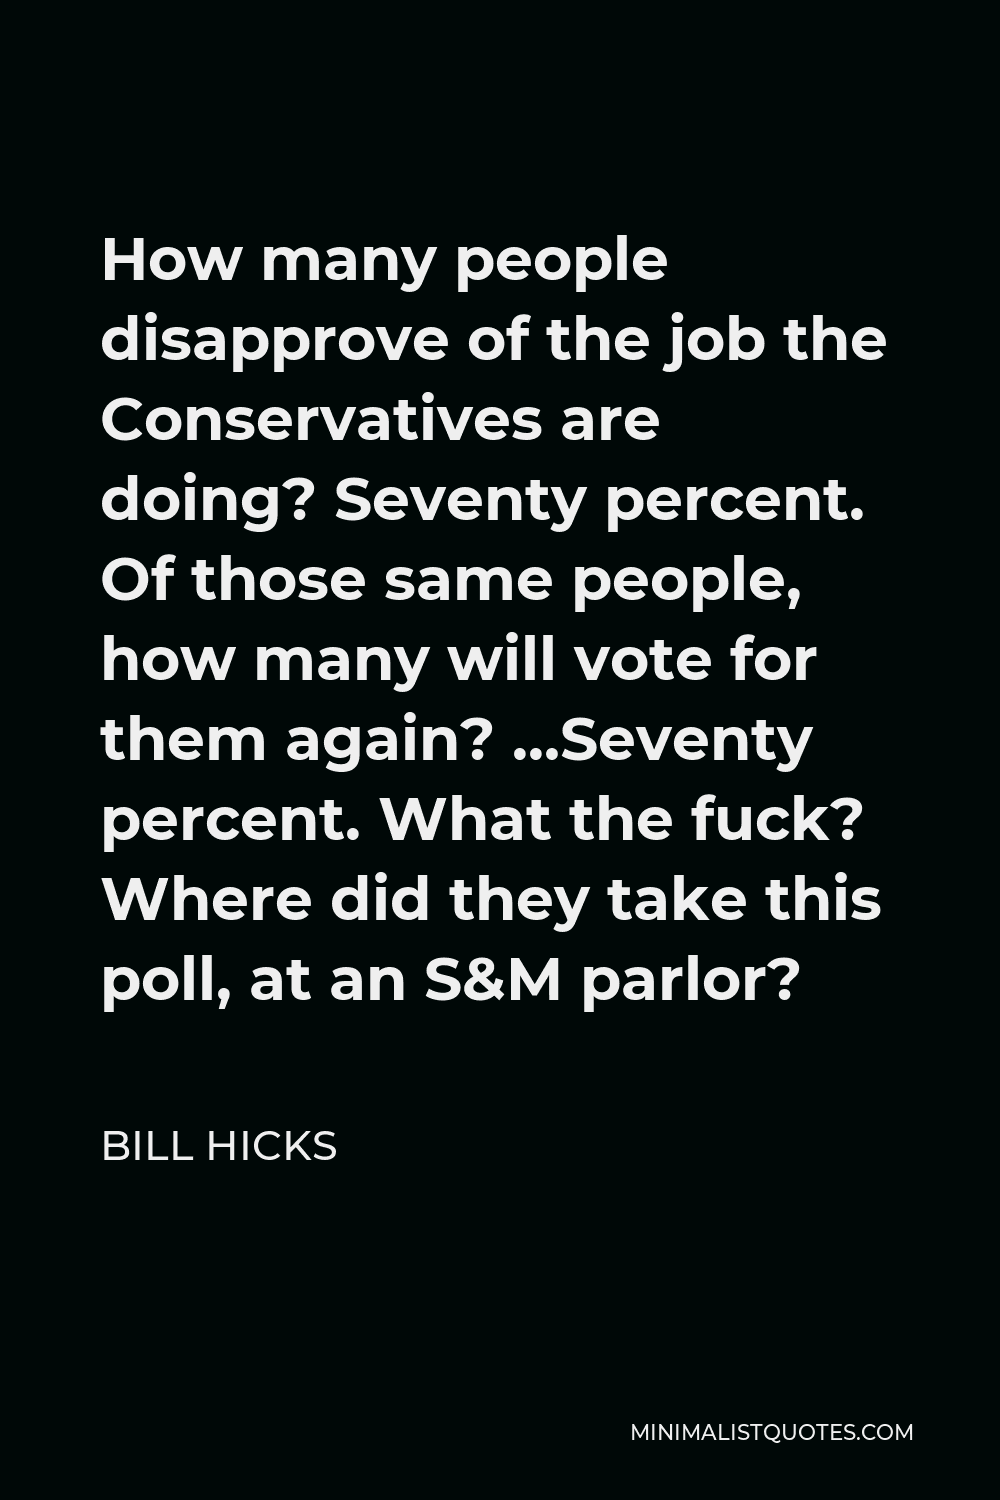 Bill Hicks Quote - How many people disapprove of the job the Conservatives are doing? Seventy percent. Of those same people, how many will vote for them again? …Seventy percent. What the fuck? Where did they take this poll, at an S&M parlor?